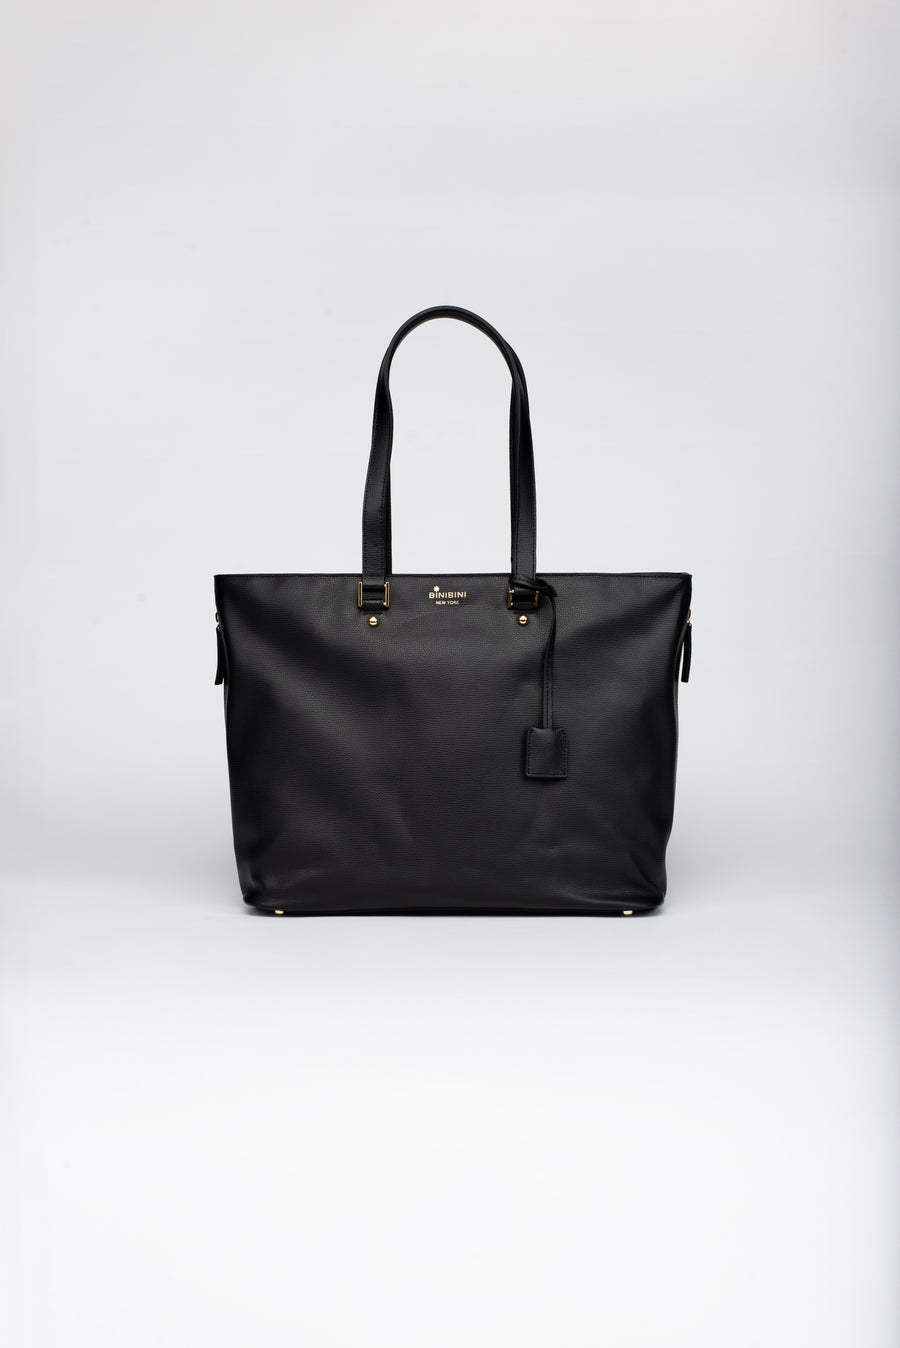 TOTE-ALL™ Leather -  Black